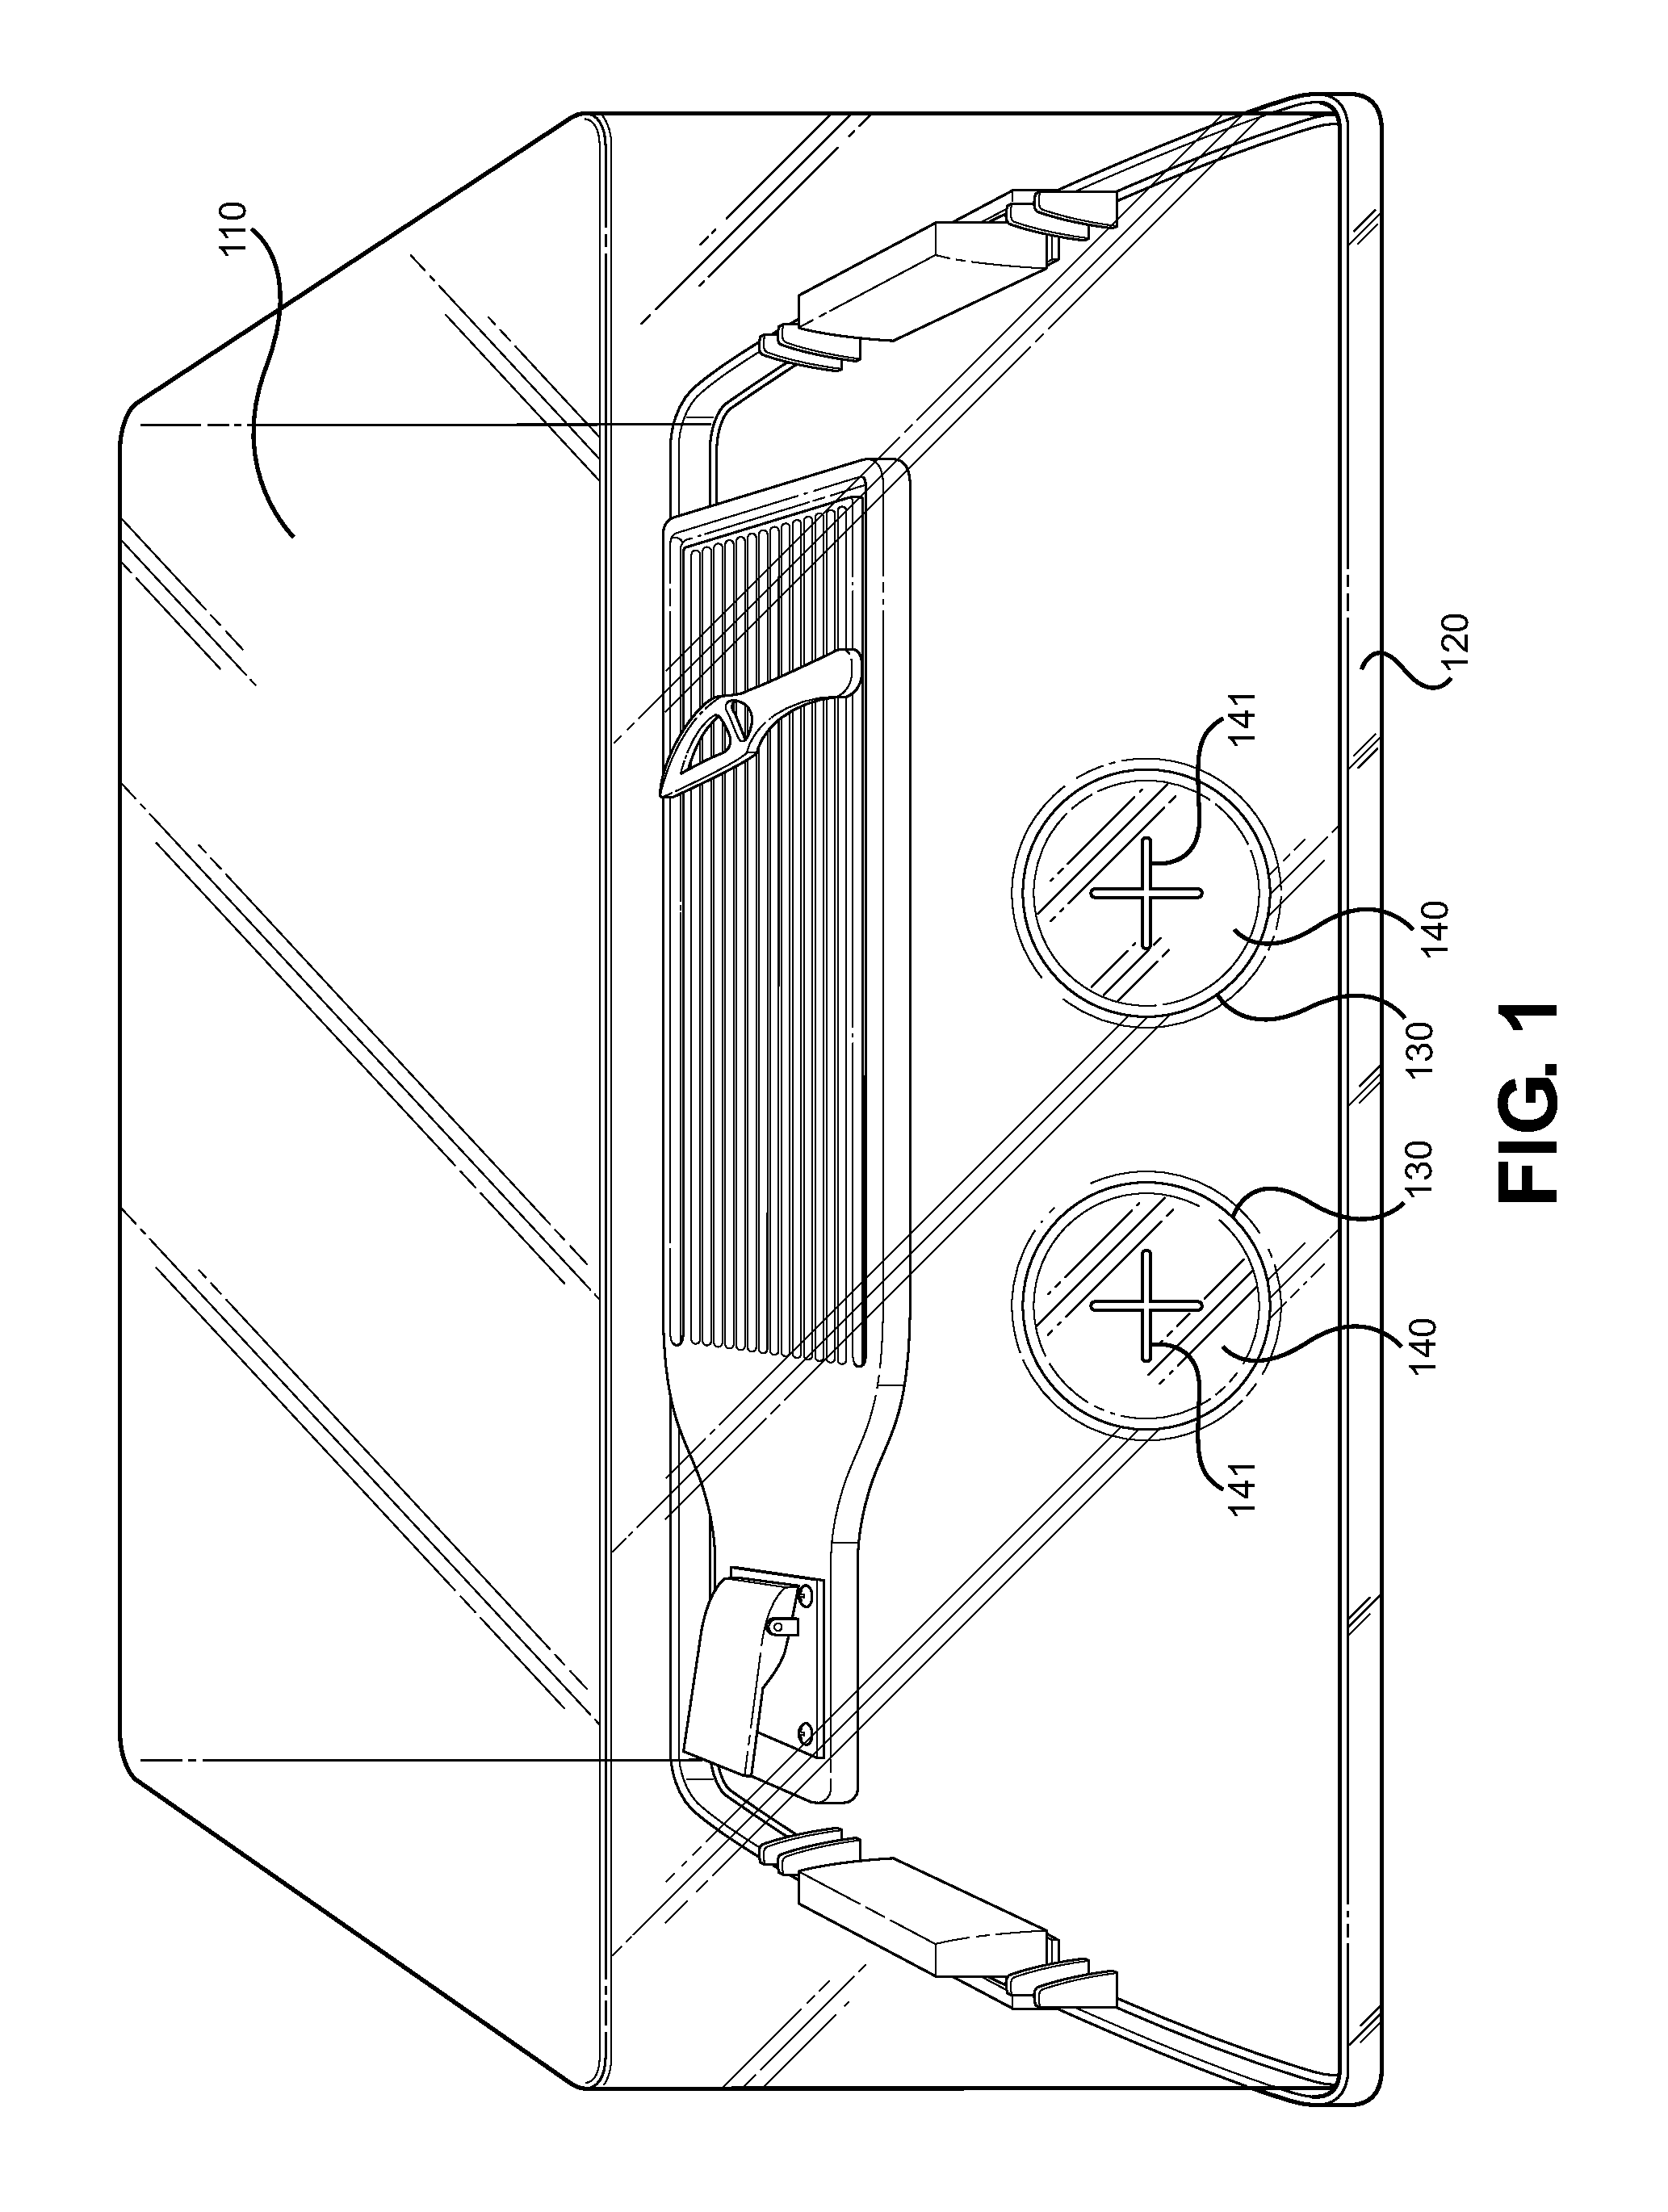 Enclosed Container for Fish Scaling and Food Preparation